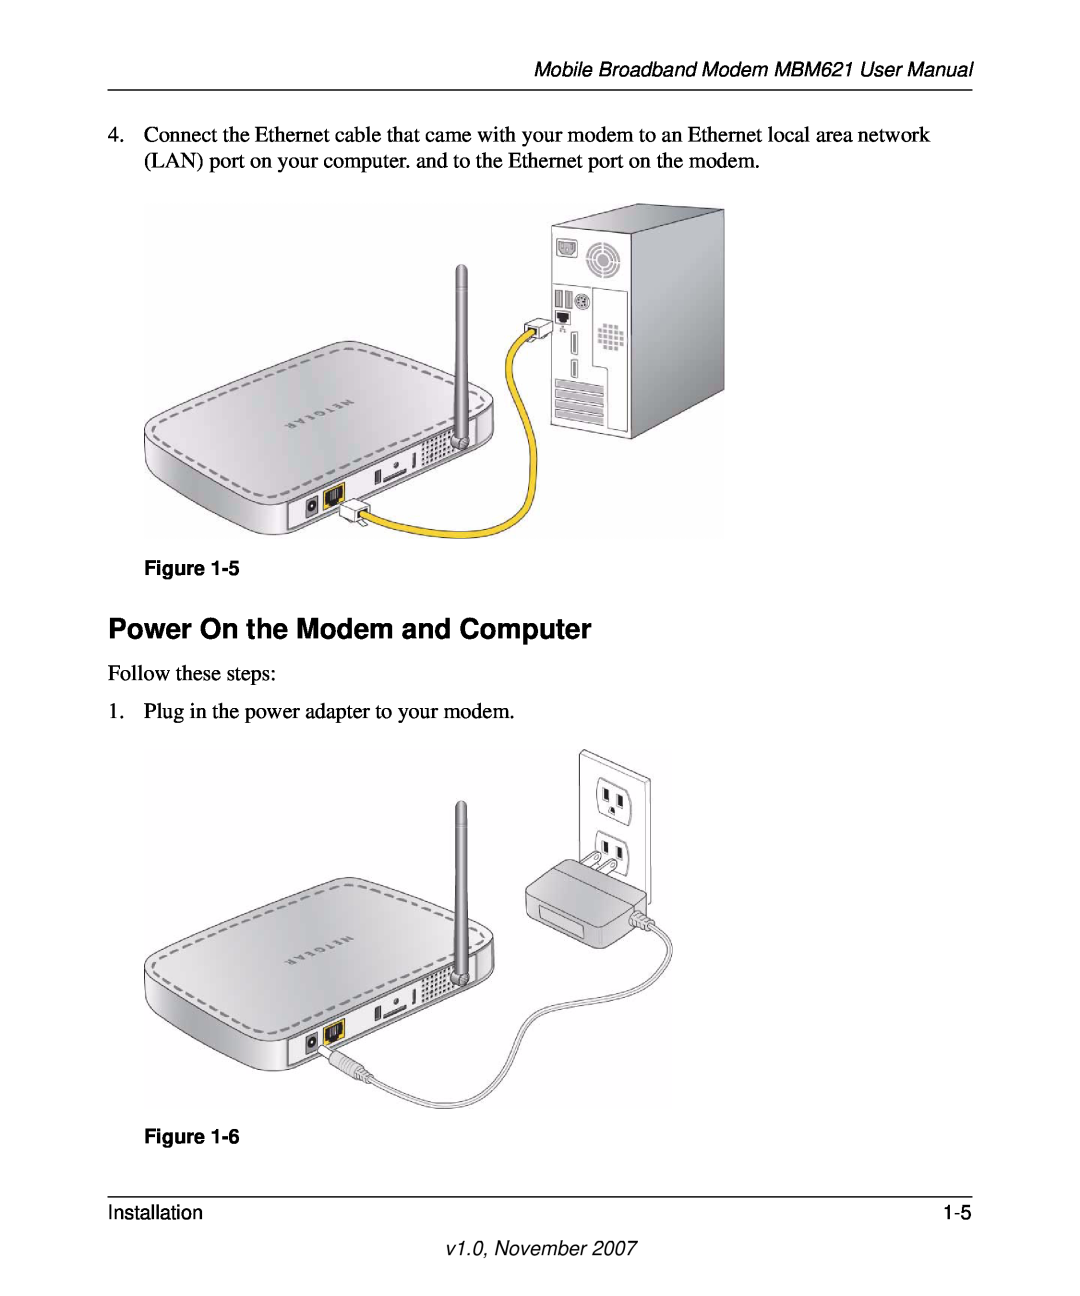 NETGEAR MBM621 user manual Power On the Modem and Computer, Follow these steps 1. Plug in the power adapter to your modem 